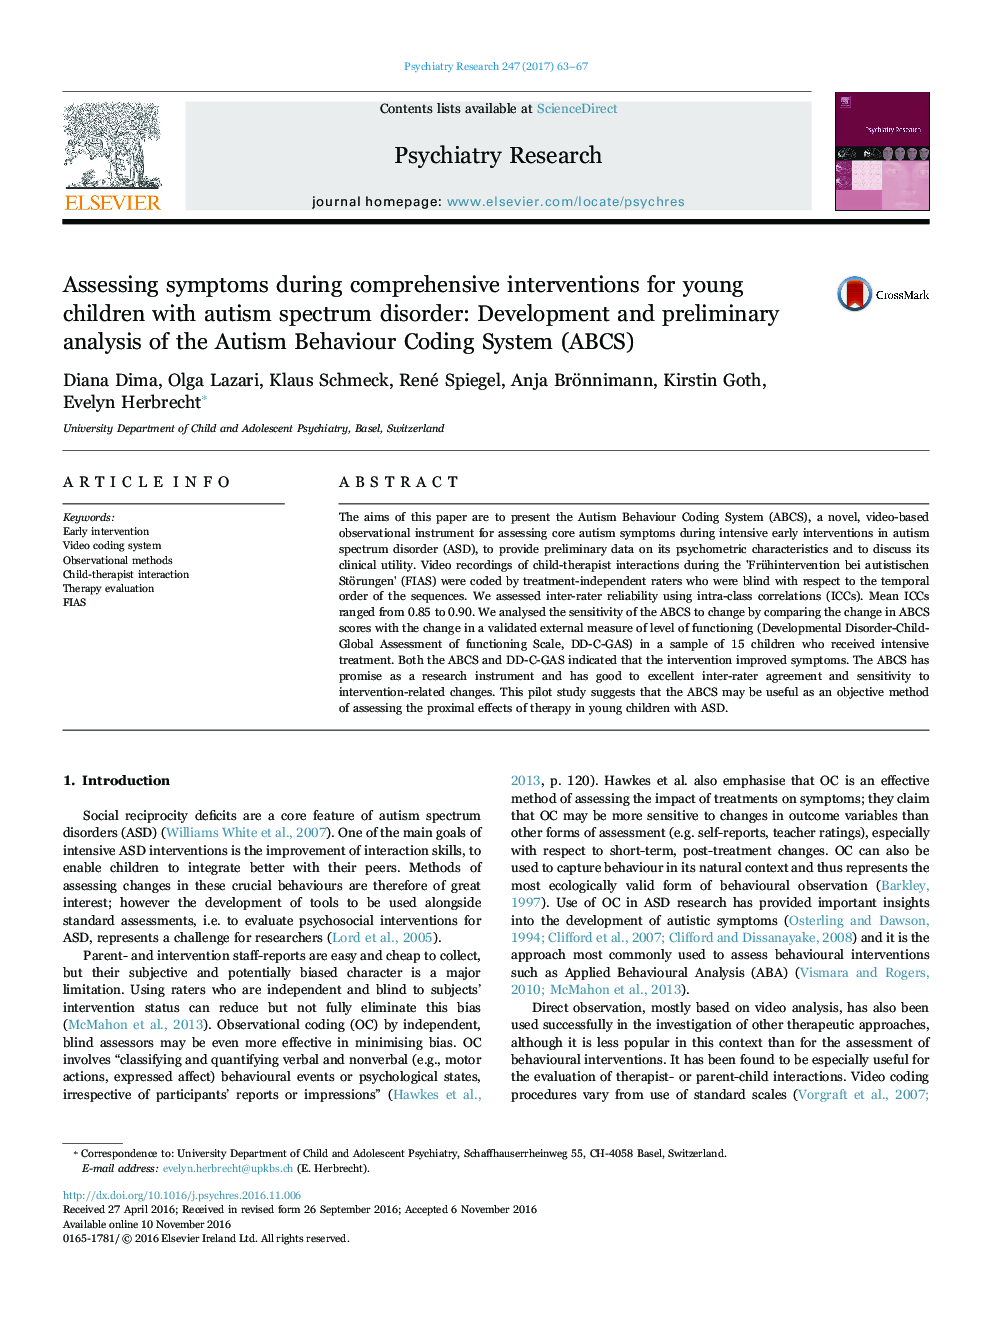 Assessing symptoms during comprehensive interventions for young children with autism spectrum disorder: Development and preliminary analysis of the Autism Behaviour Coding System (ABCS)